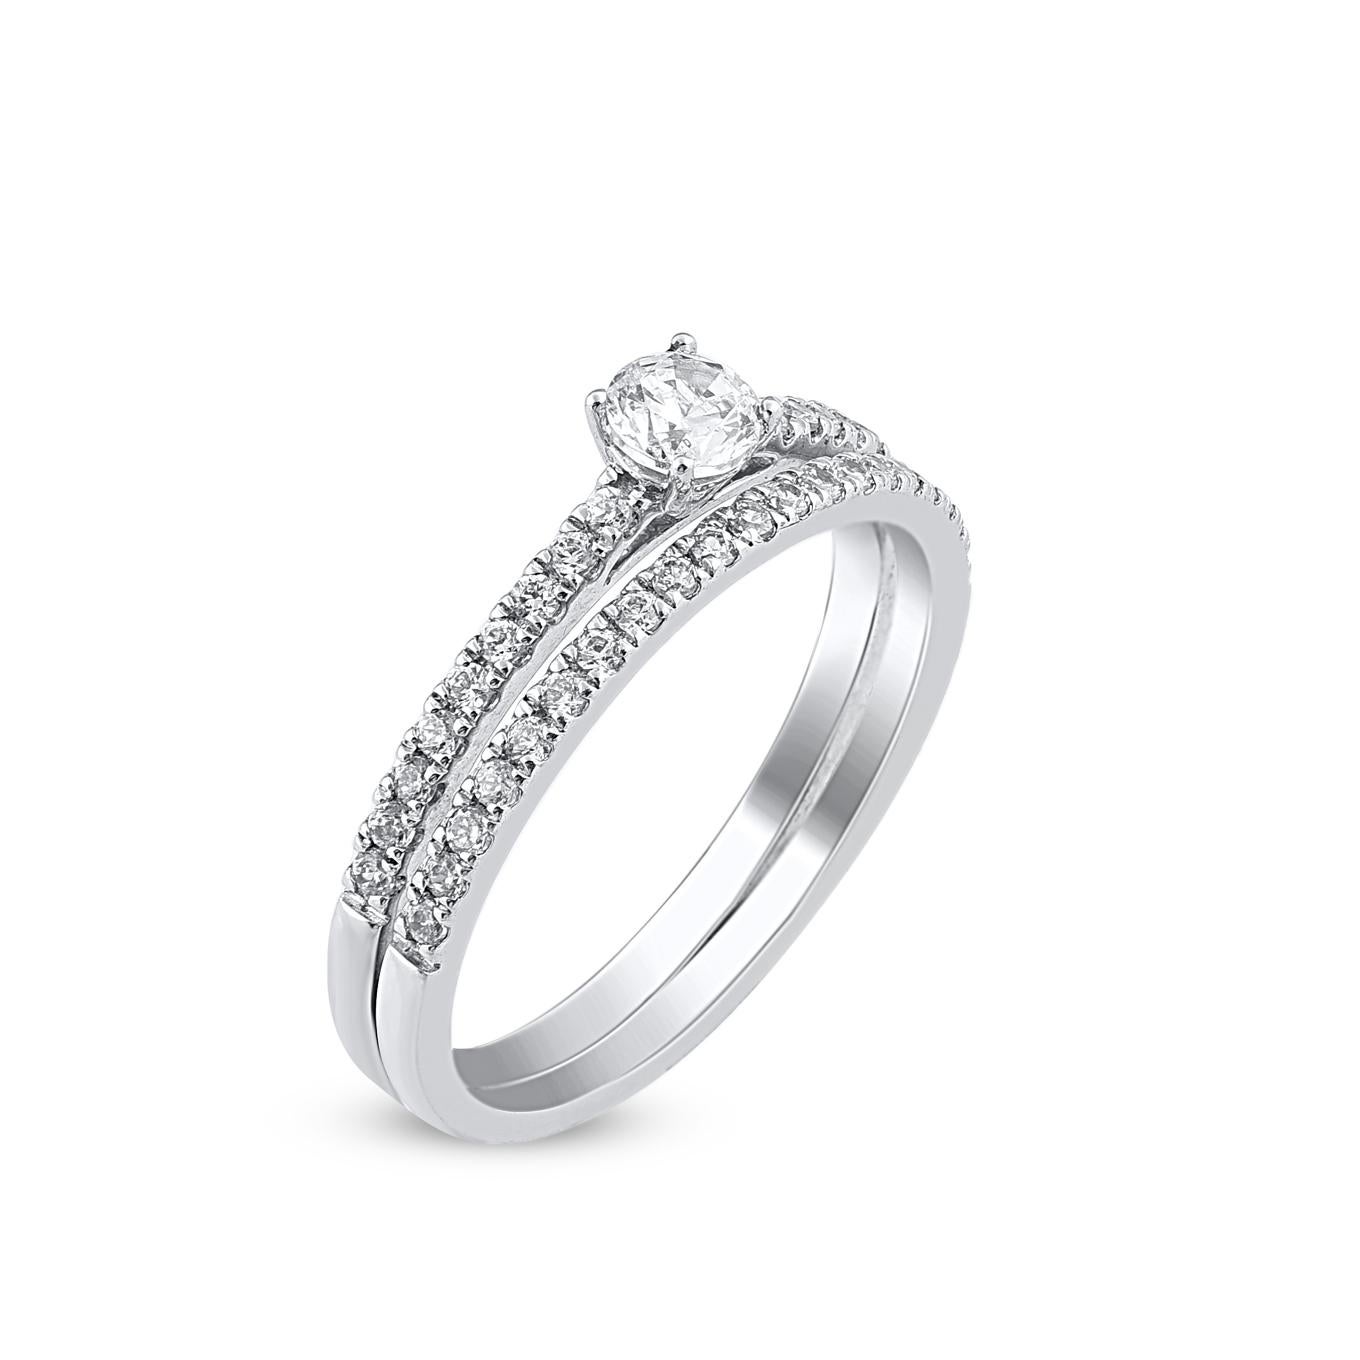 Symbolize your love with the classic design of this stunning round natural diamond bridal set in 14KT white gold. This wedding ring features a sparkling 39 brilliant cut round diamond beautifully set in prong setting. The total diamond weight is